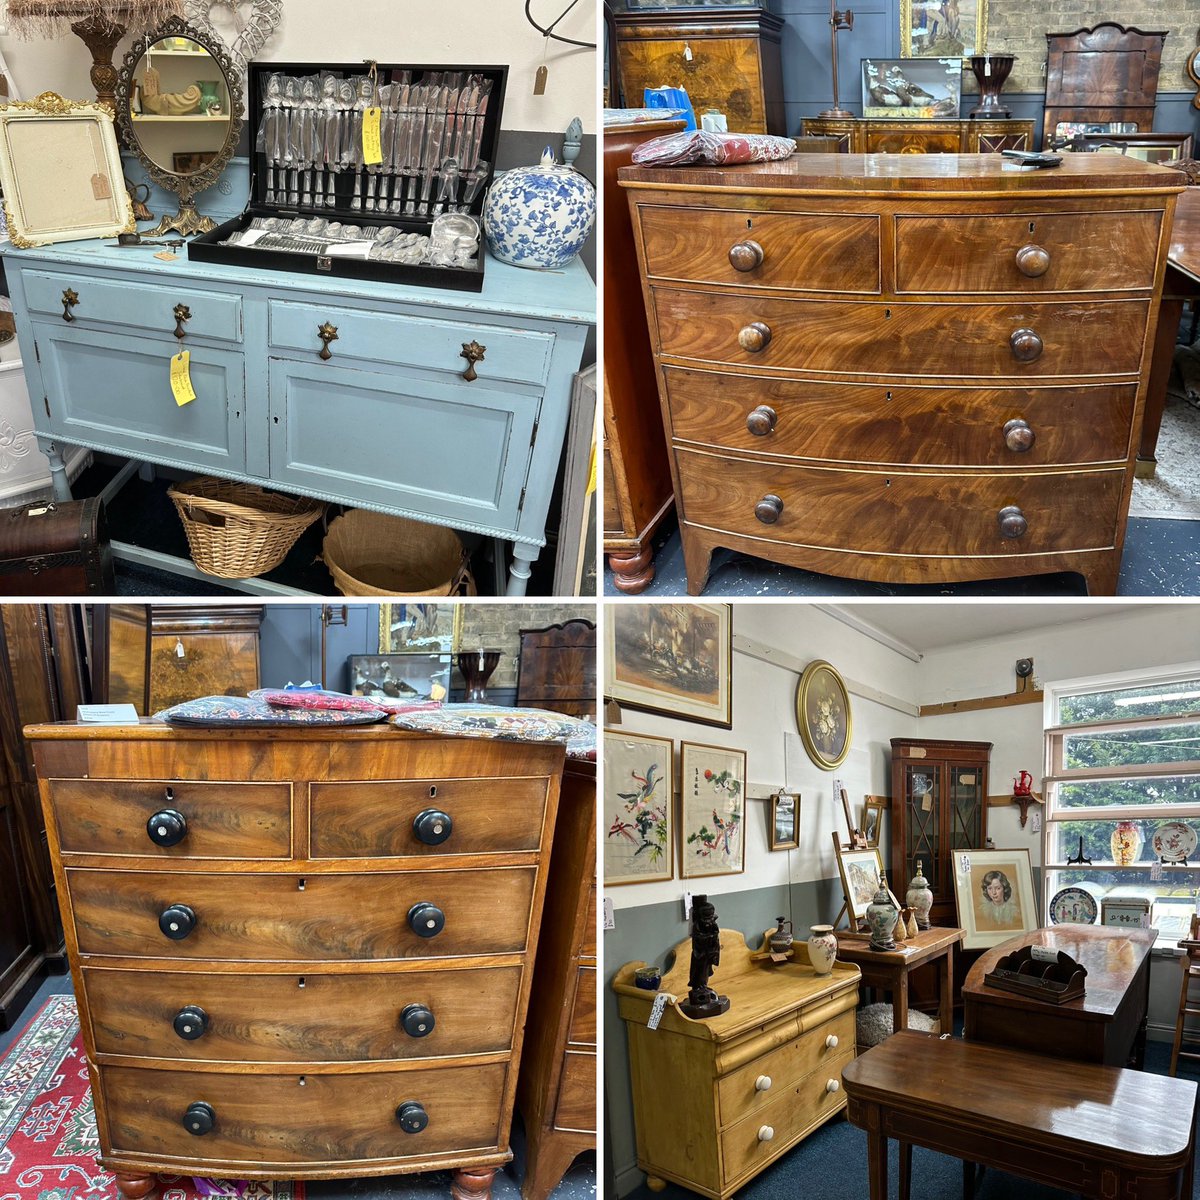 Good morning! We have many different styles to suit all tastes and budgets. #traditionalfurniture #pinefurniture #paintedfurniture #mahogany #bowfronted #chestofdrawers #astraantiquescentre #hemswell #lincolnshire 

Open 10-5pm 7 days a week